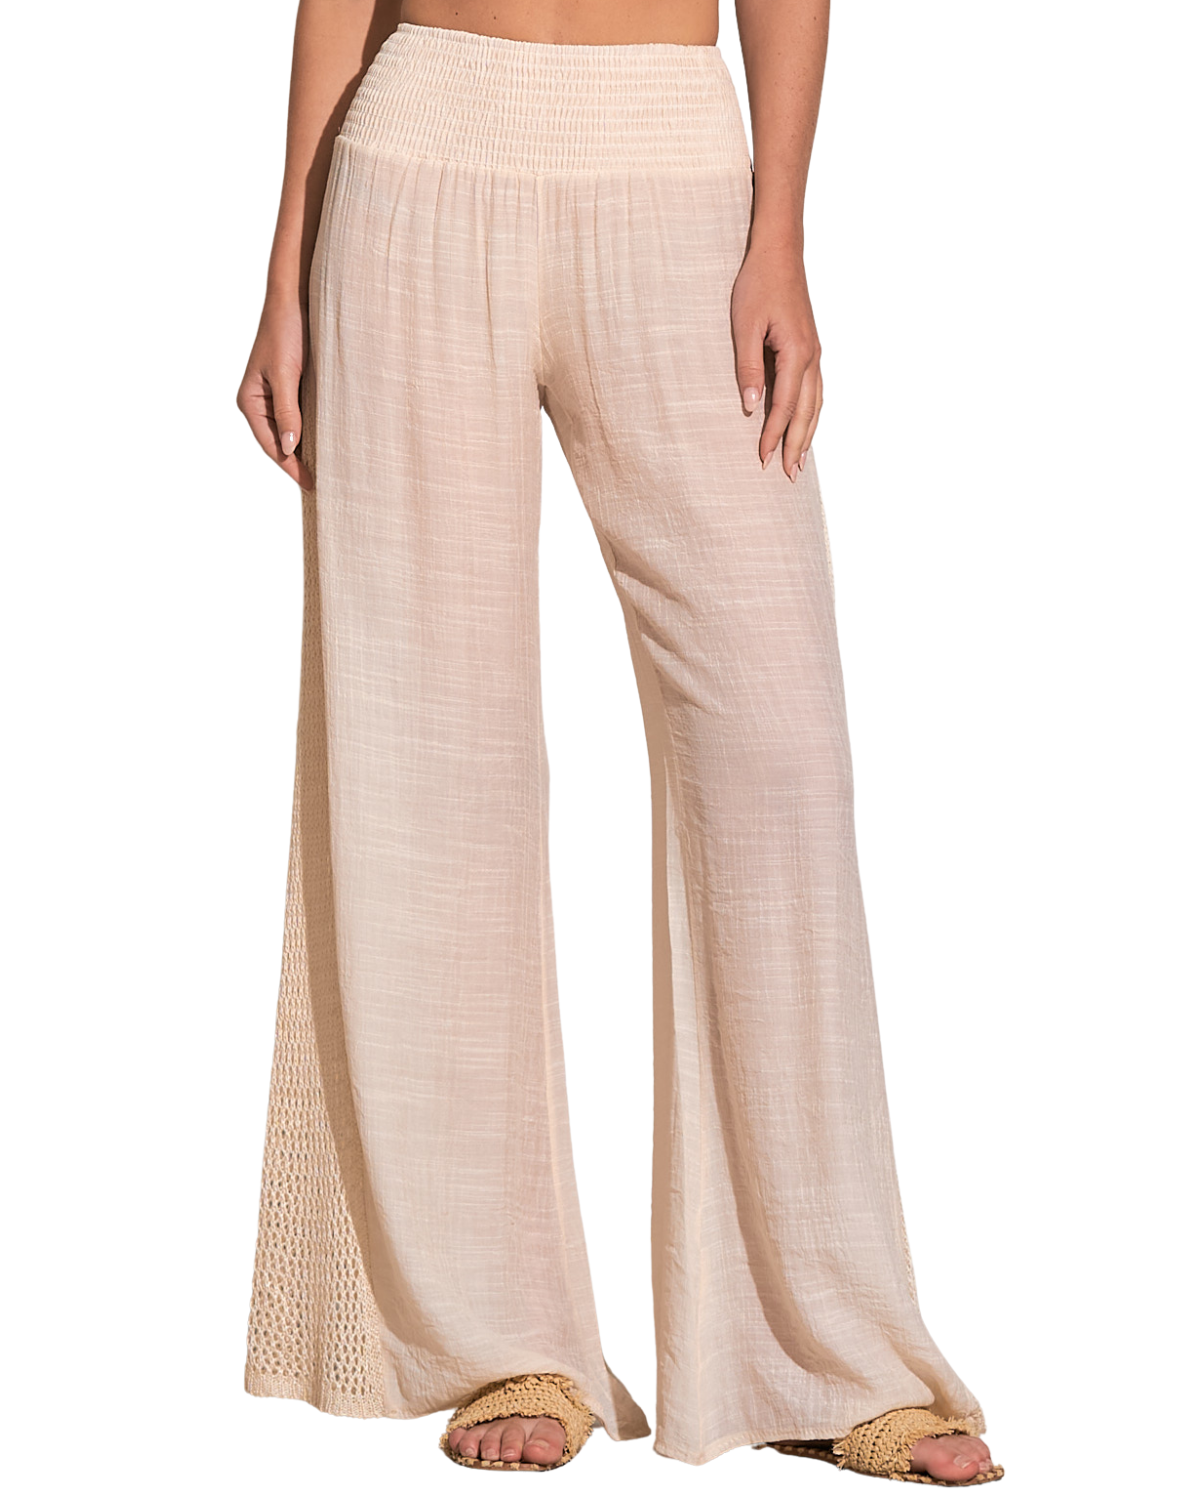 Model wearing a cover up pant with crochet side detail in beige